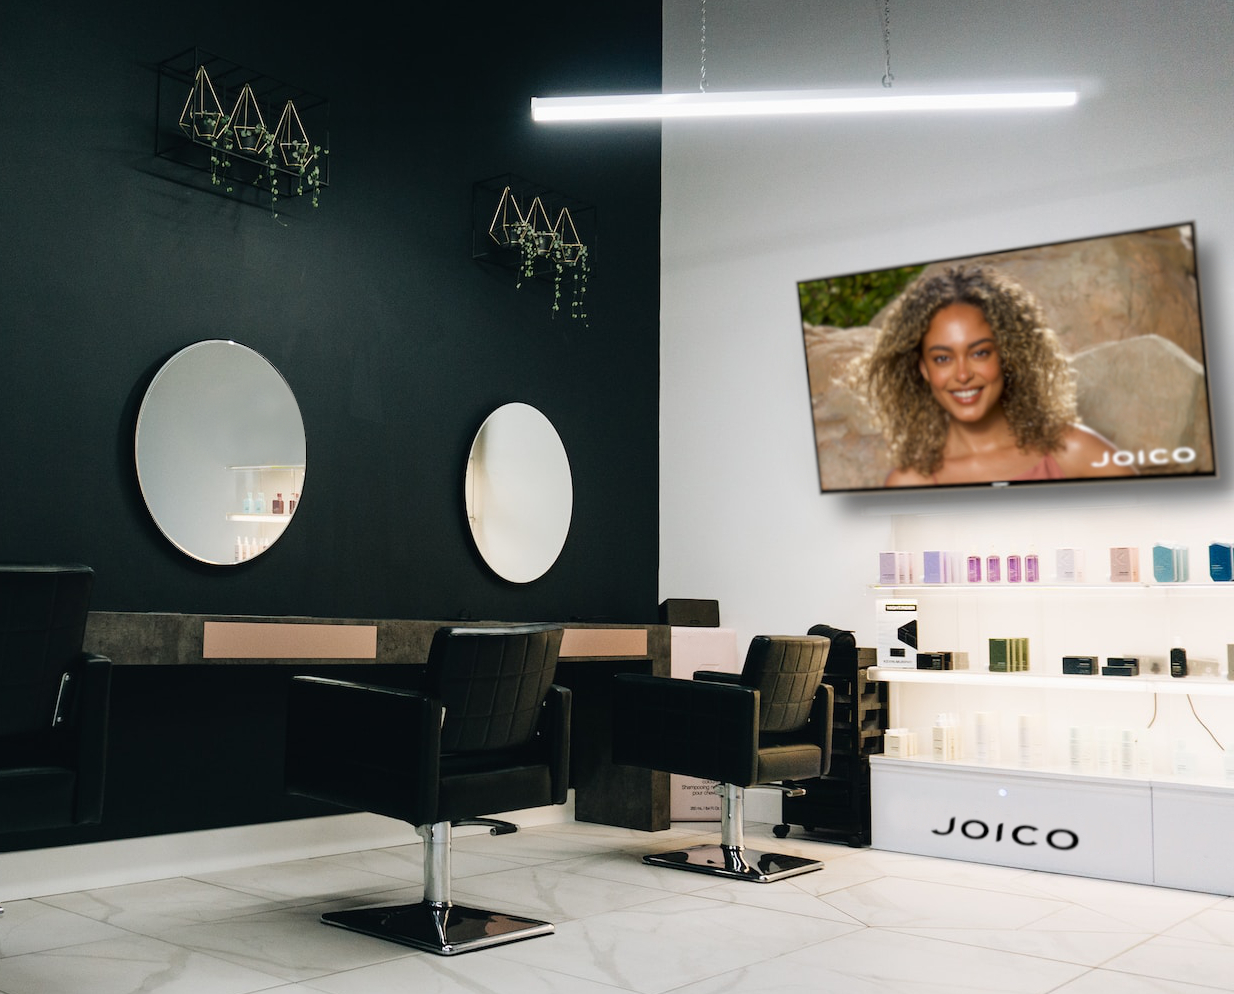 joico salon with tv playing joico video